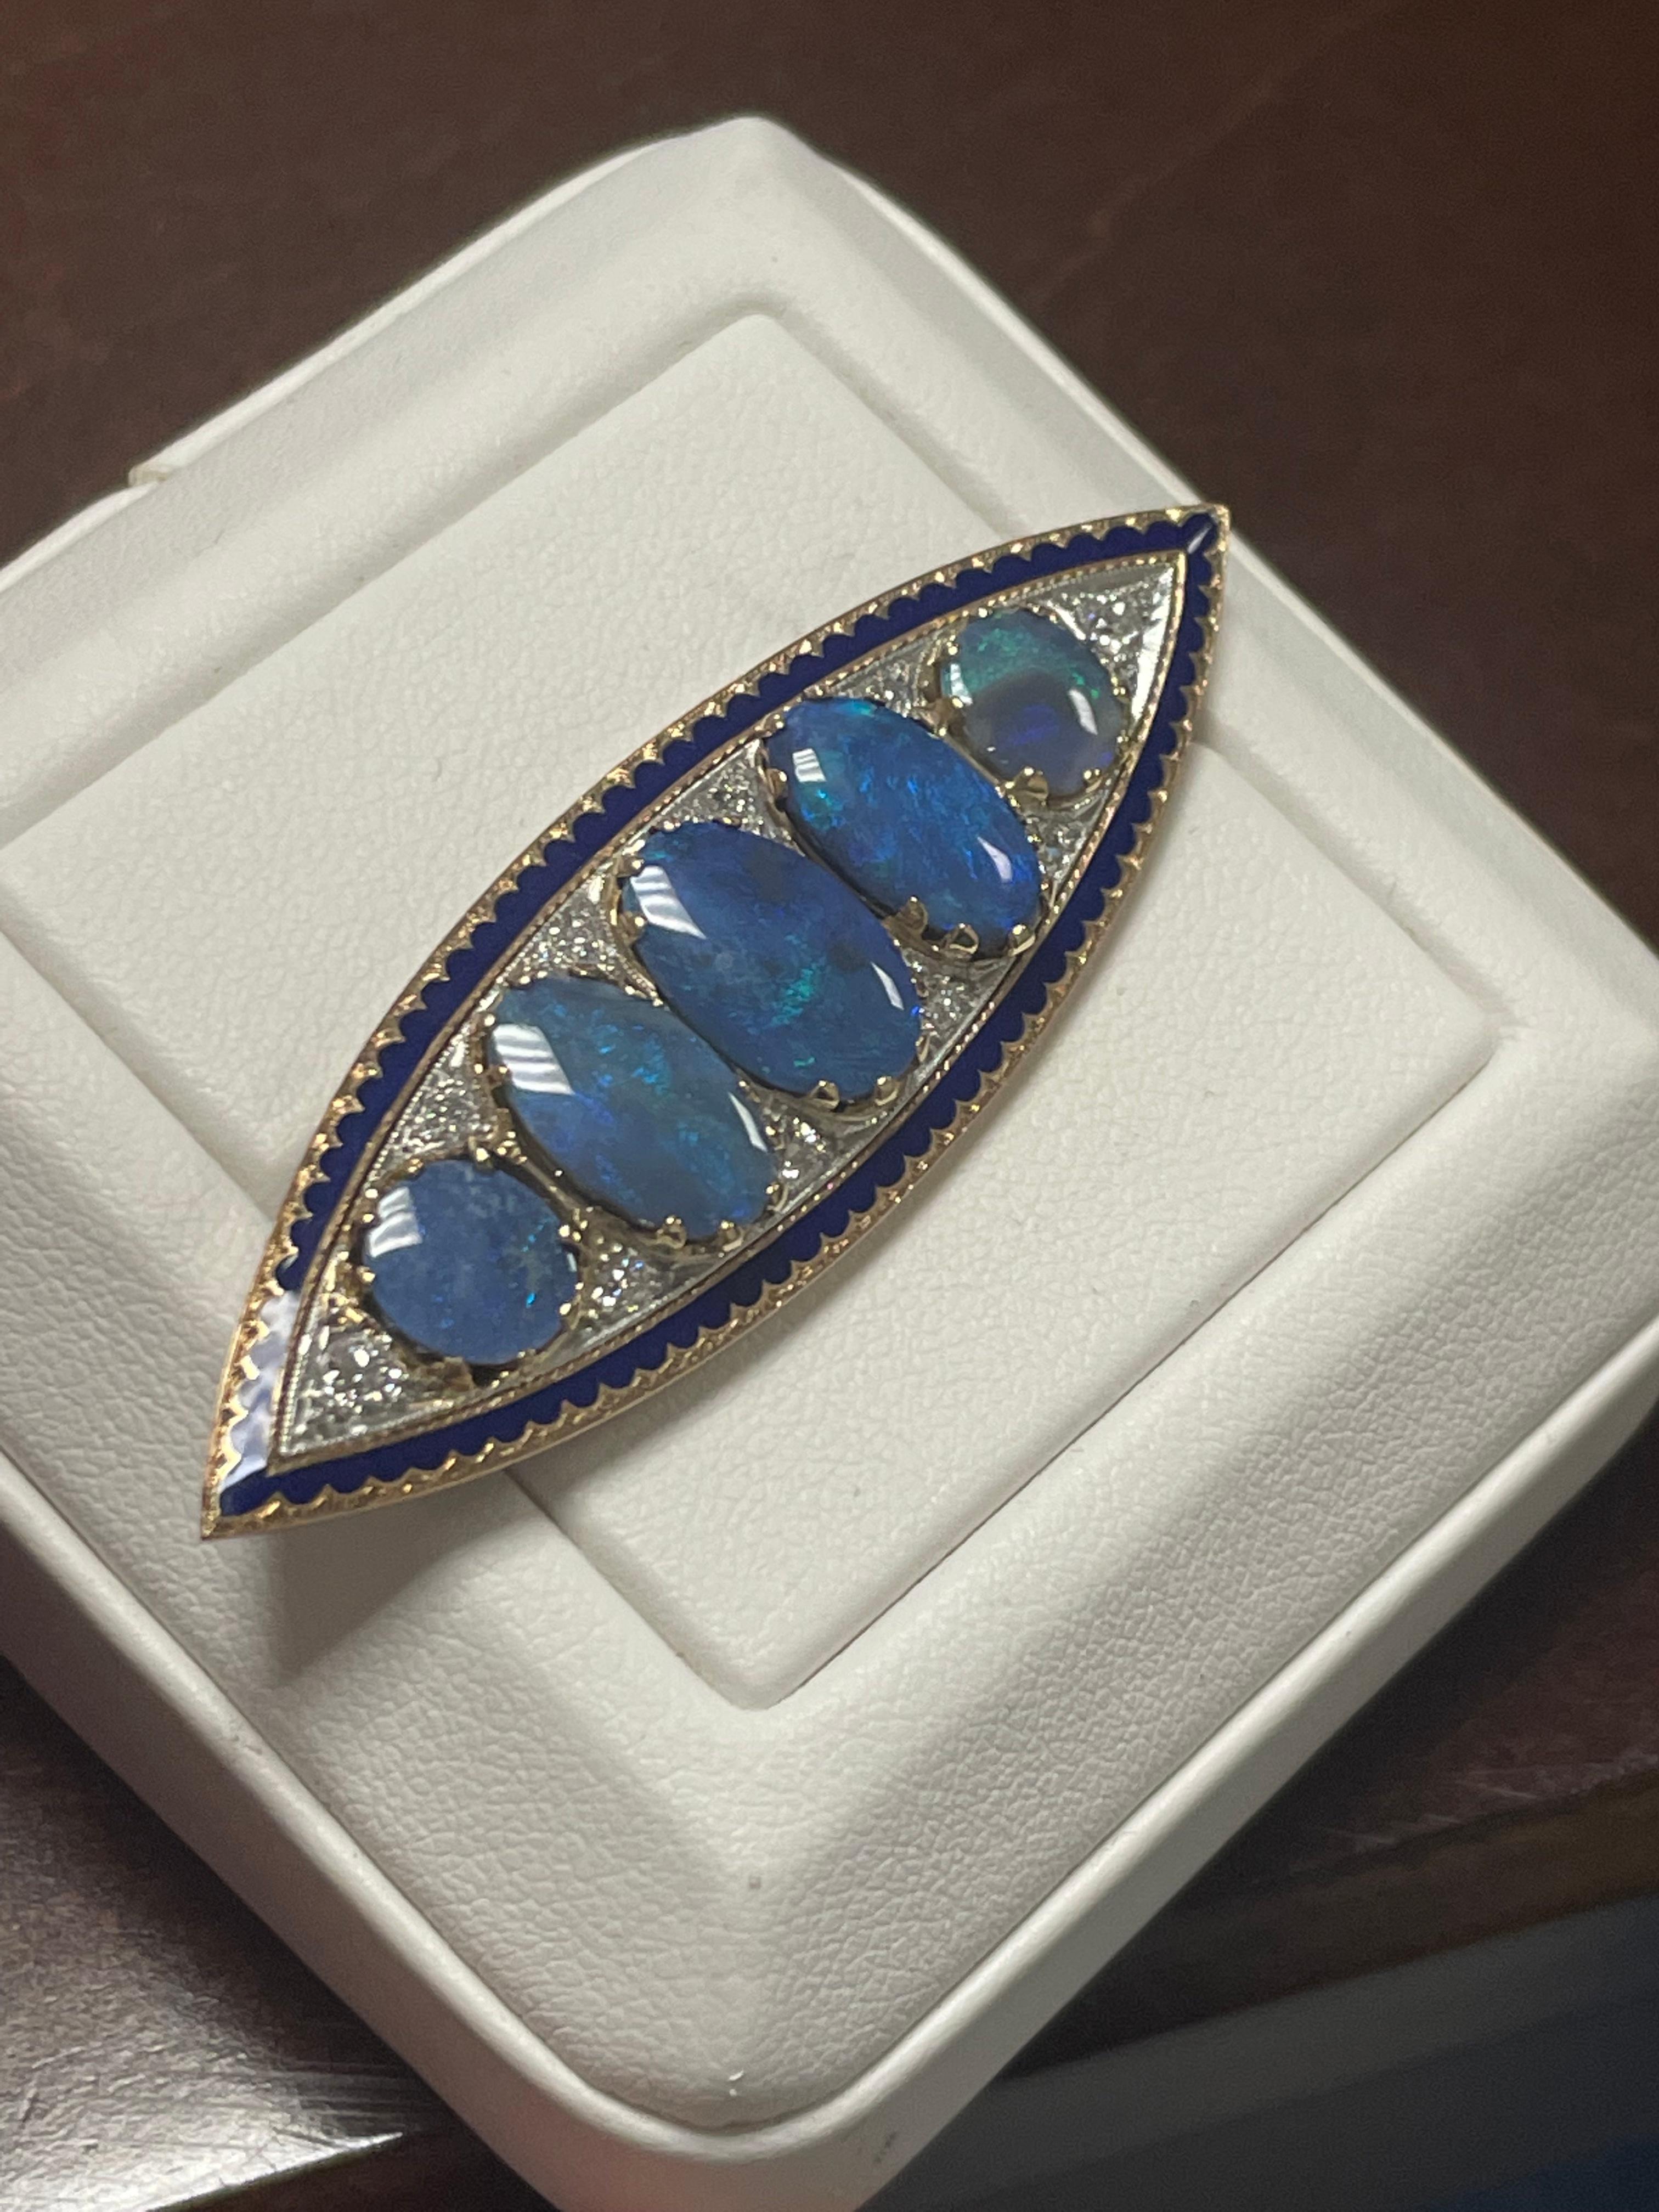 One Lady's five black opal with blue enamel, and diamonds broach in 15k yellow gold.  Bright, cabochon shape with fire pattern.  Brightness of fire and saturation with blue only.  Measurements are (1) 13.0mm x 8.0mm, (2) 11.6 x 6.0 (2) 7.0 mm in